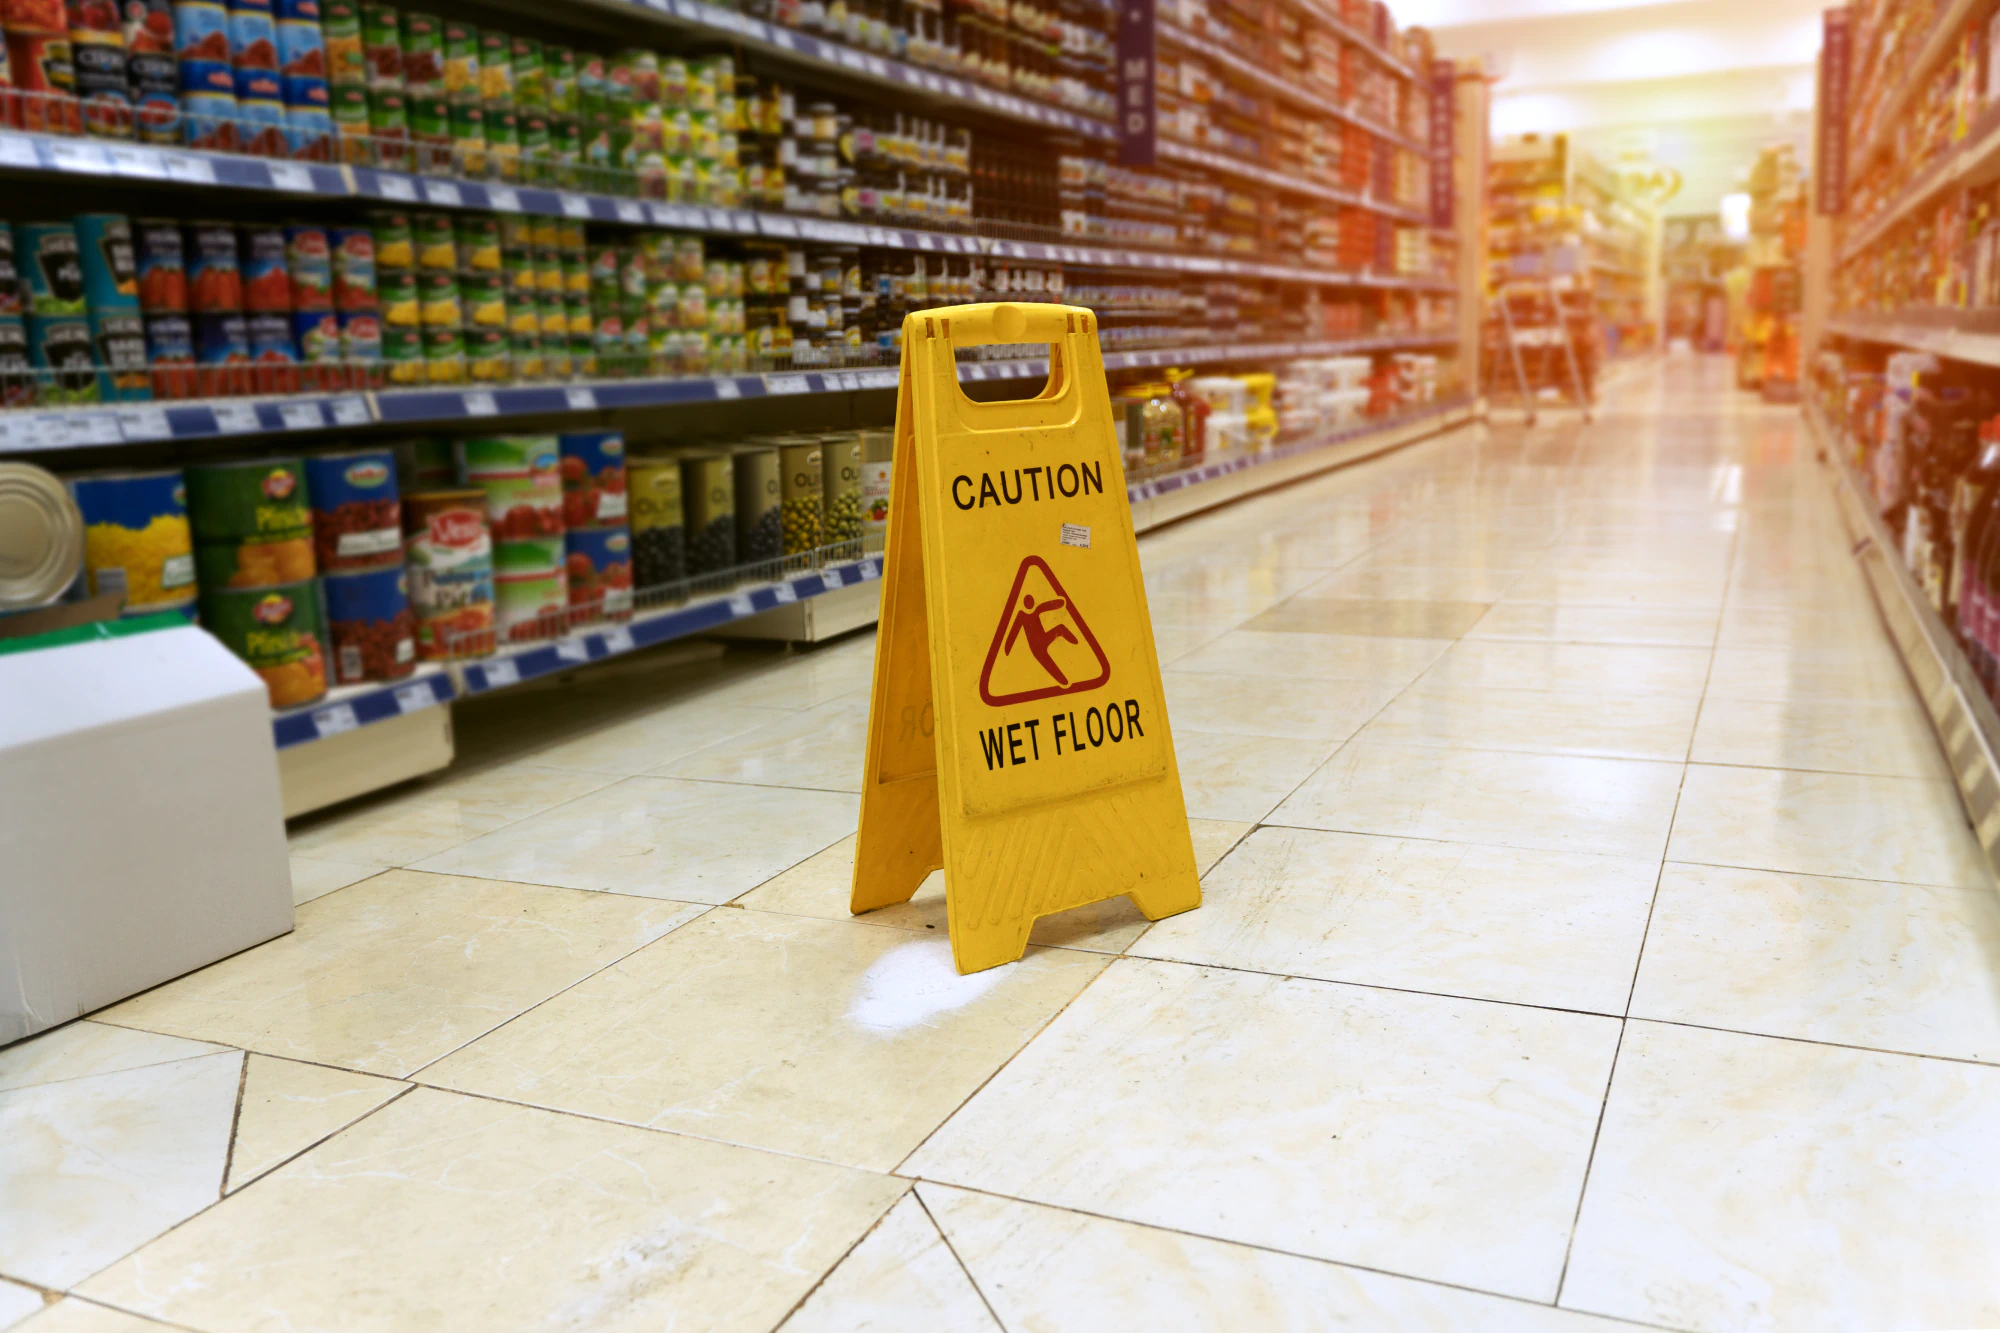 Wet floor sign sitting on the soapy, wet floor of a supermarket aisle.